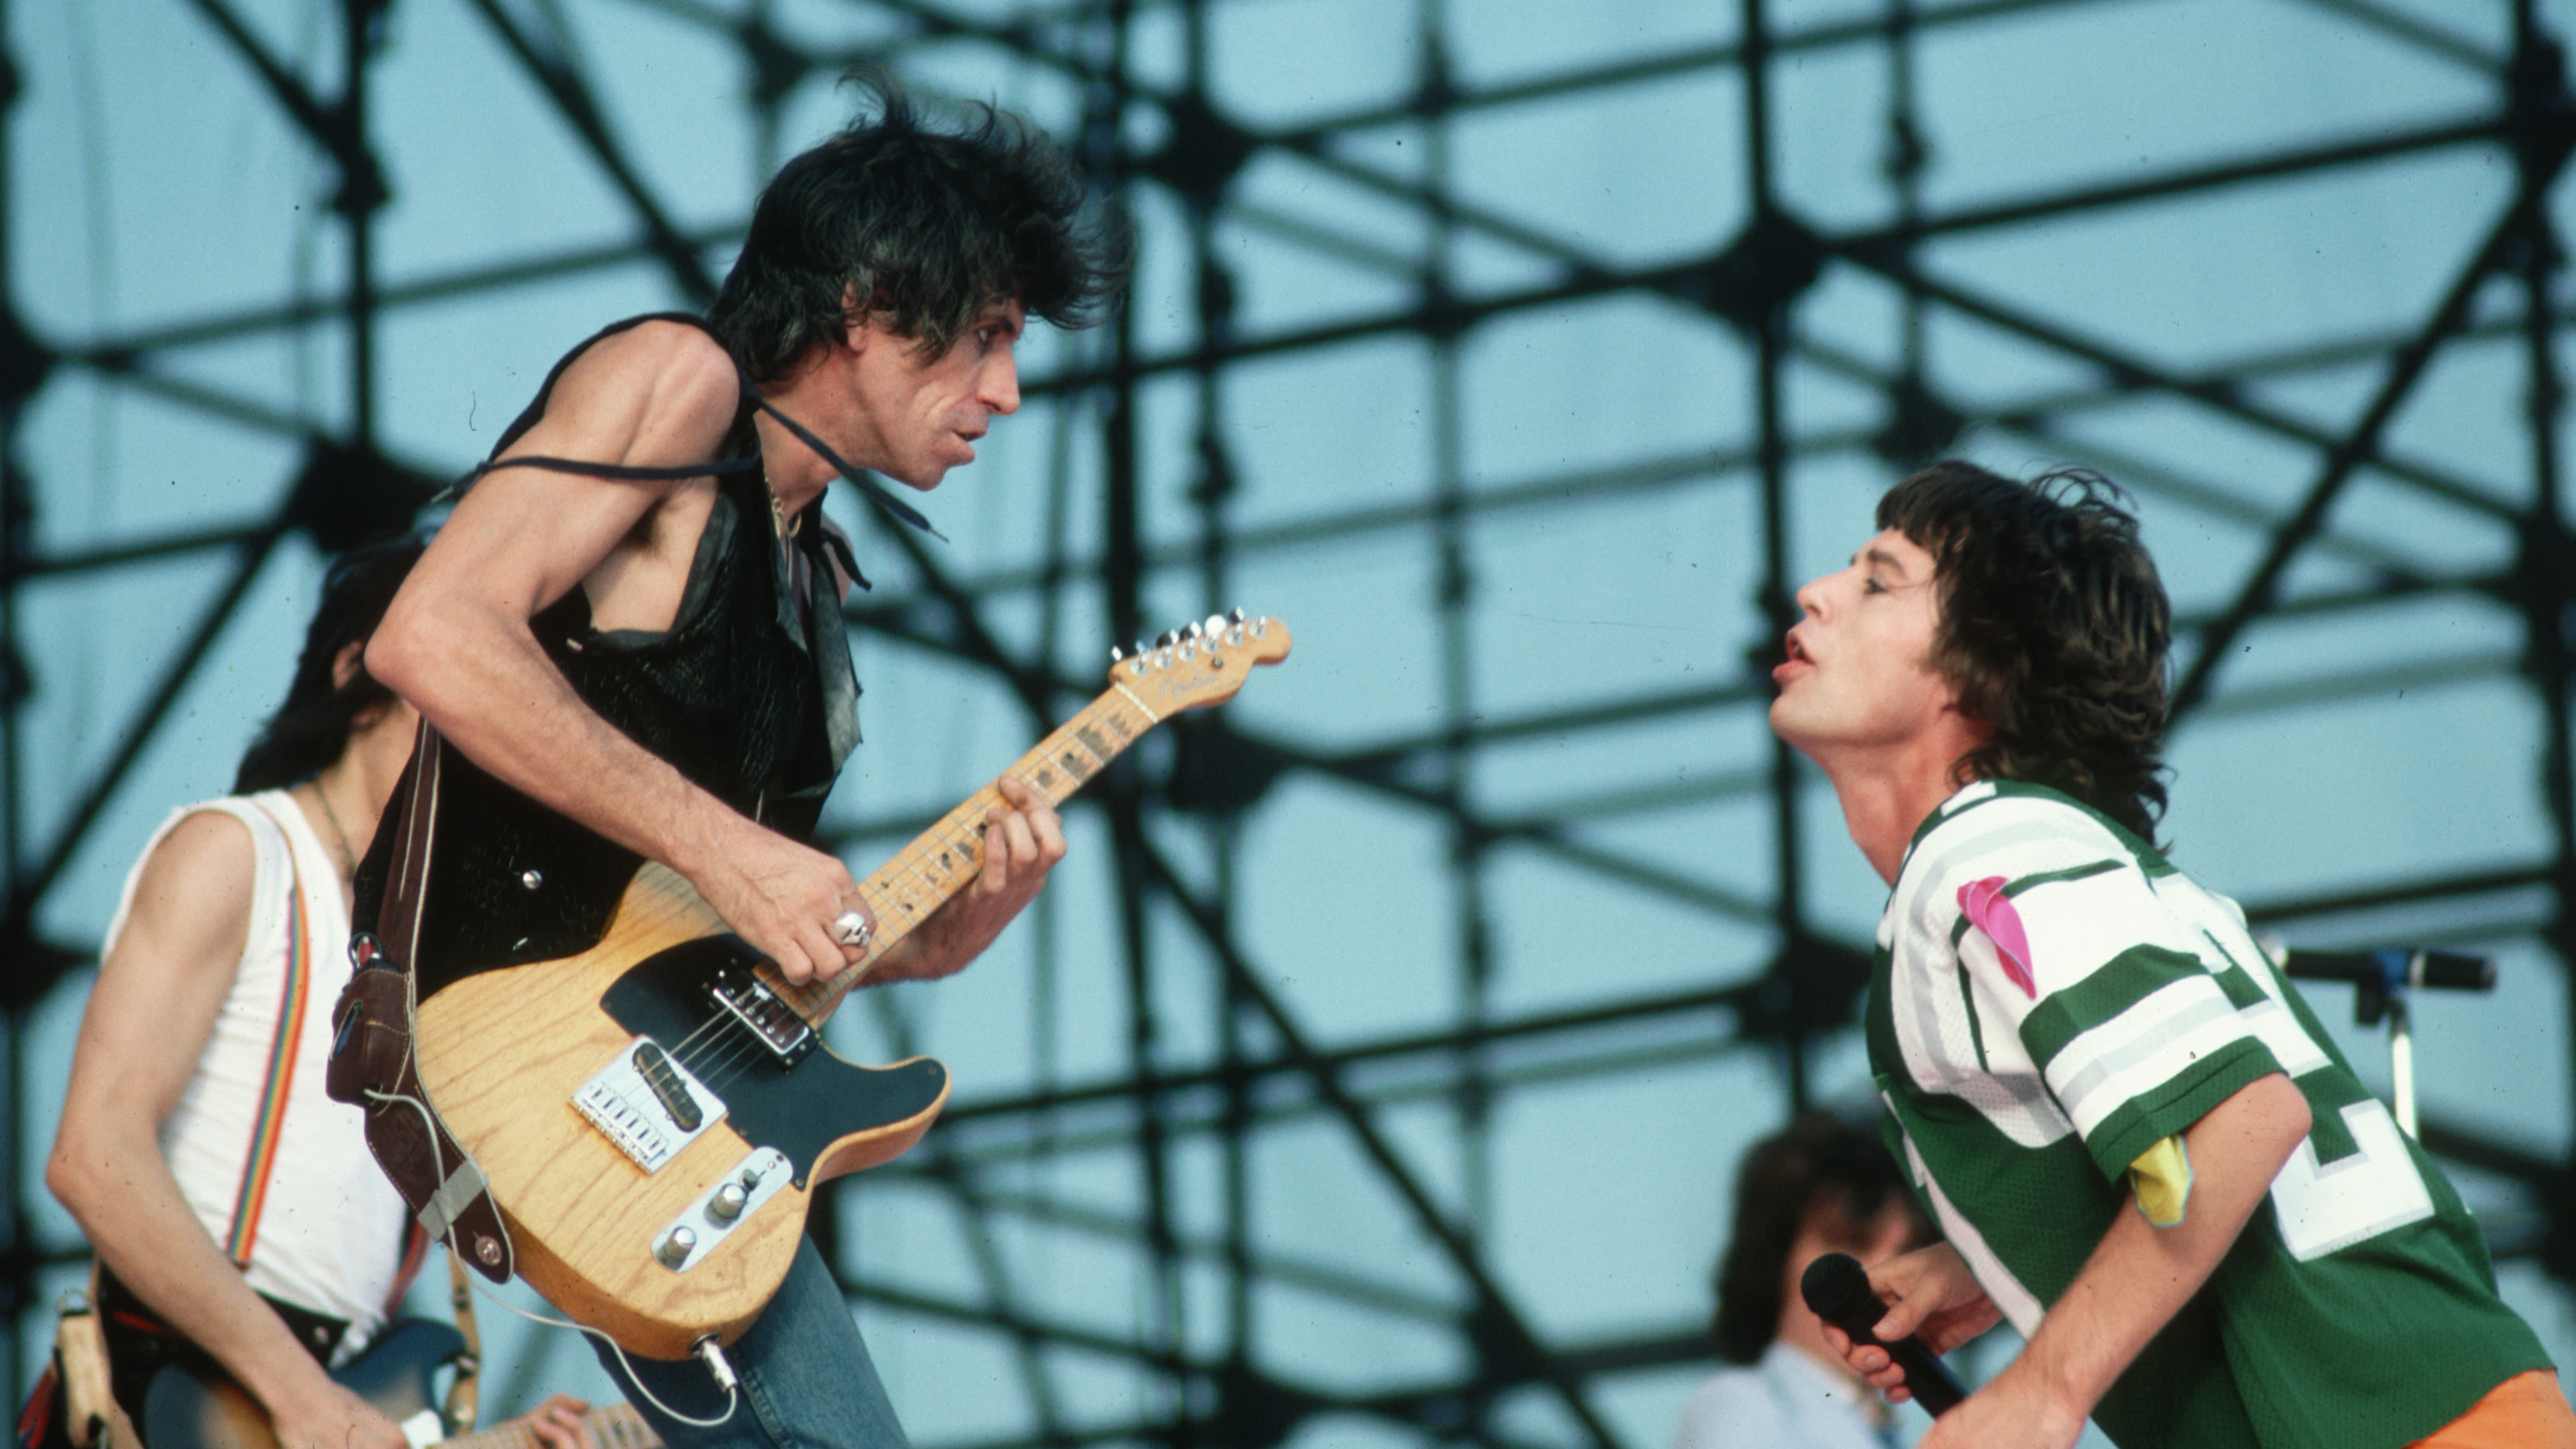 Are you getting the most out of your power chords? Tom Bukovac has a tip from the Rolling Stones guitar playbook